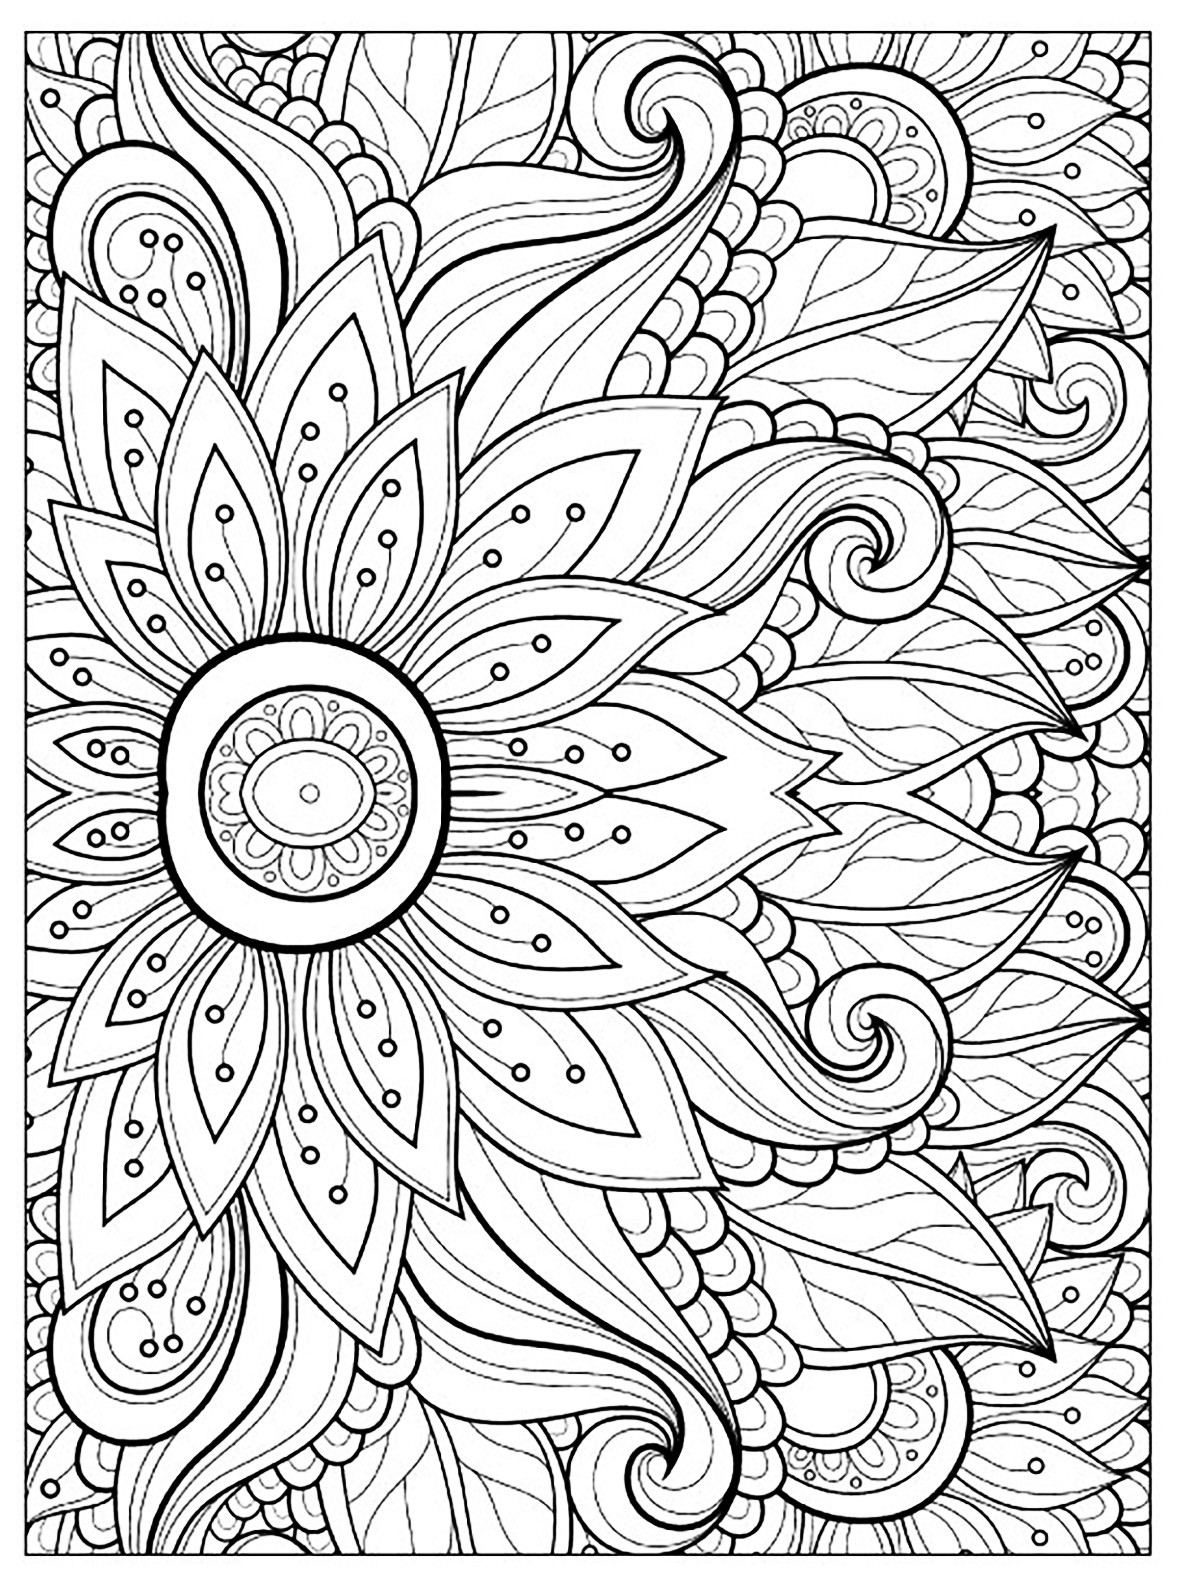 Coloring Pages For Adults Flowers
 Flower with many petals Flowers Adult Coloring Pages